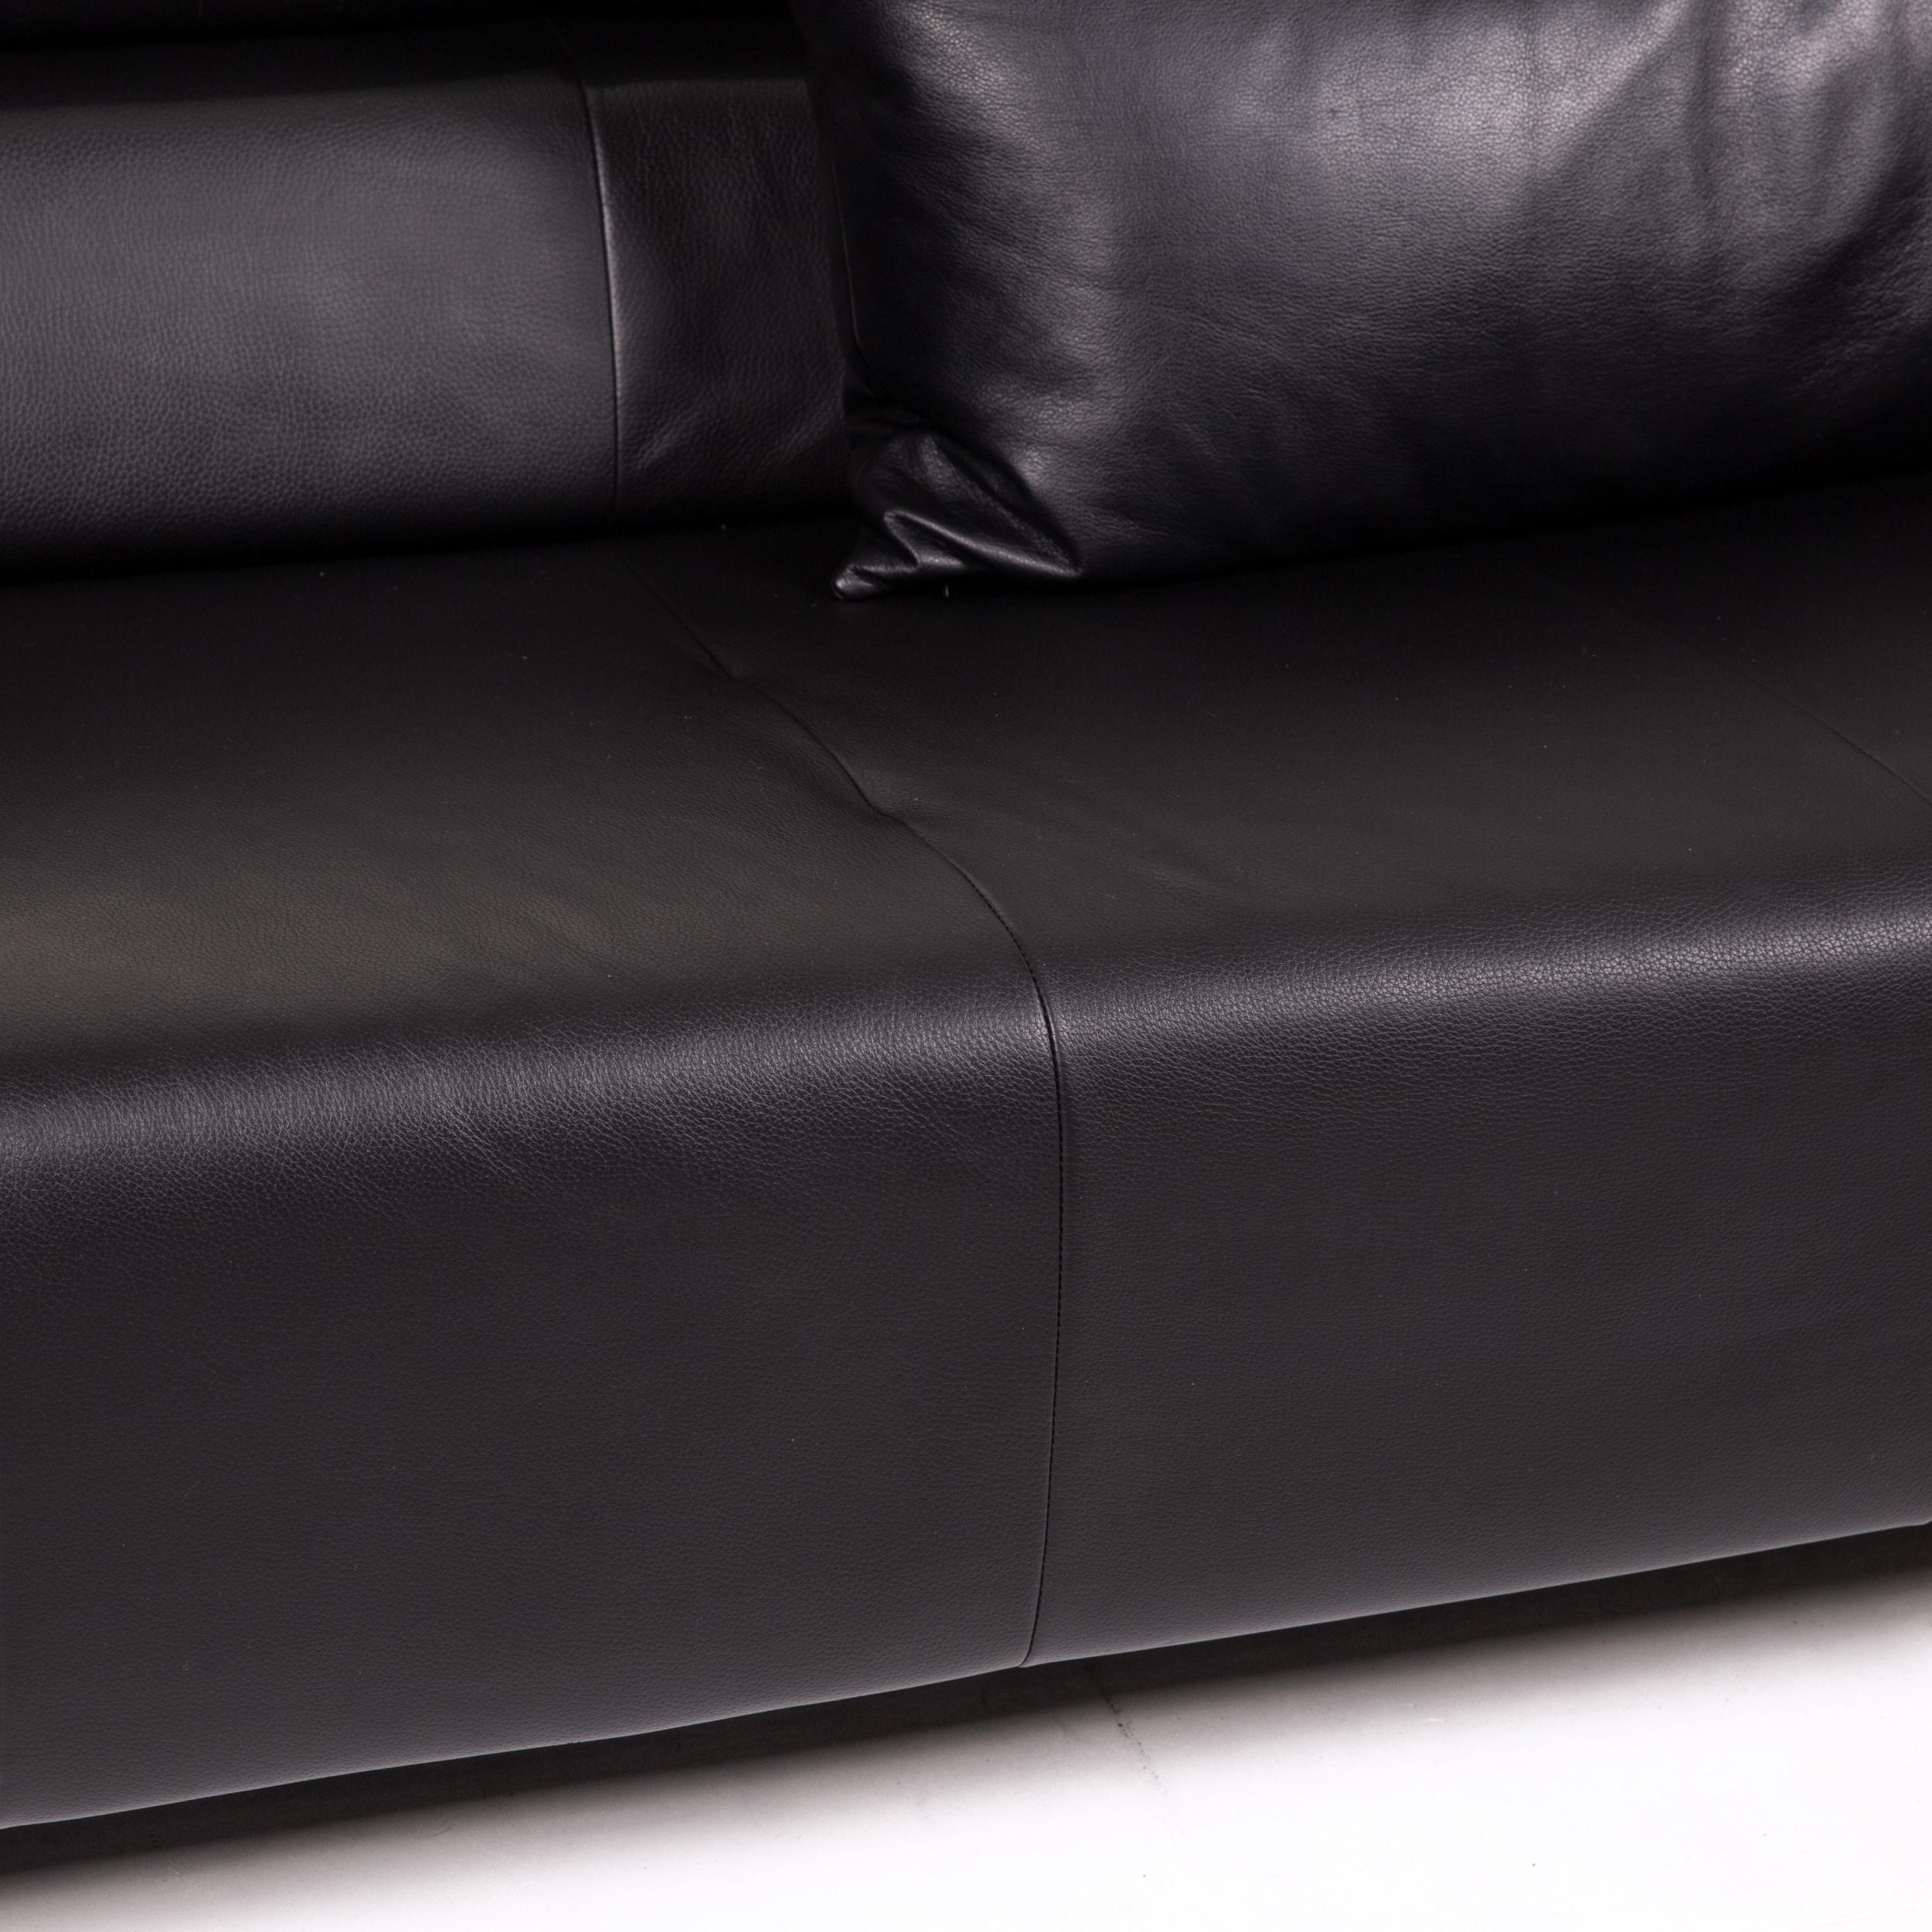 Rolf Benz AK 422 Leather Sofa Black Three-Seat Couch For Sale 1